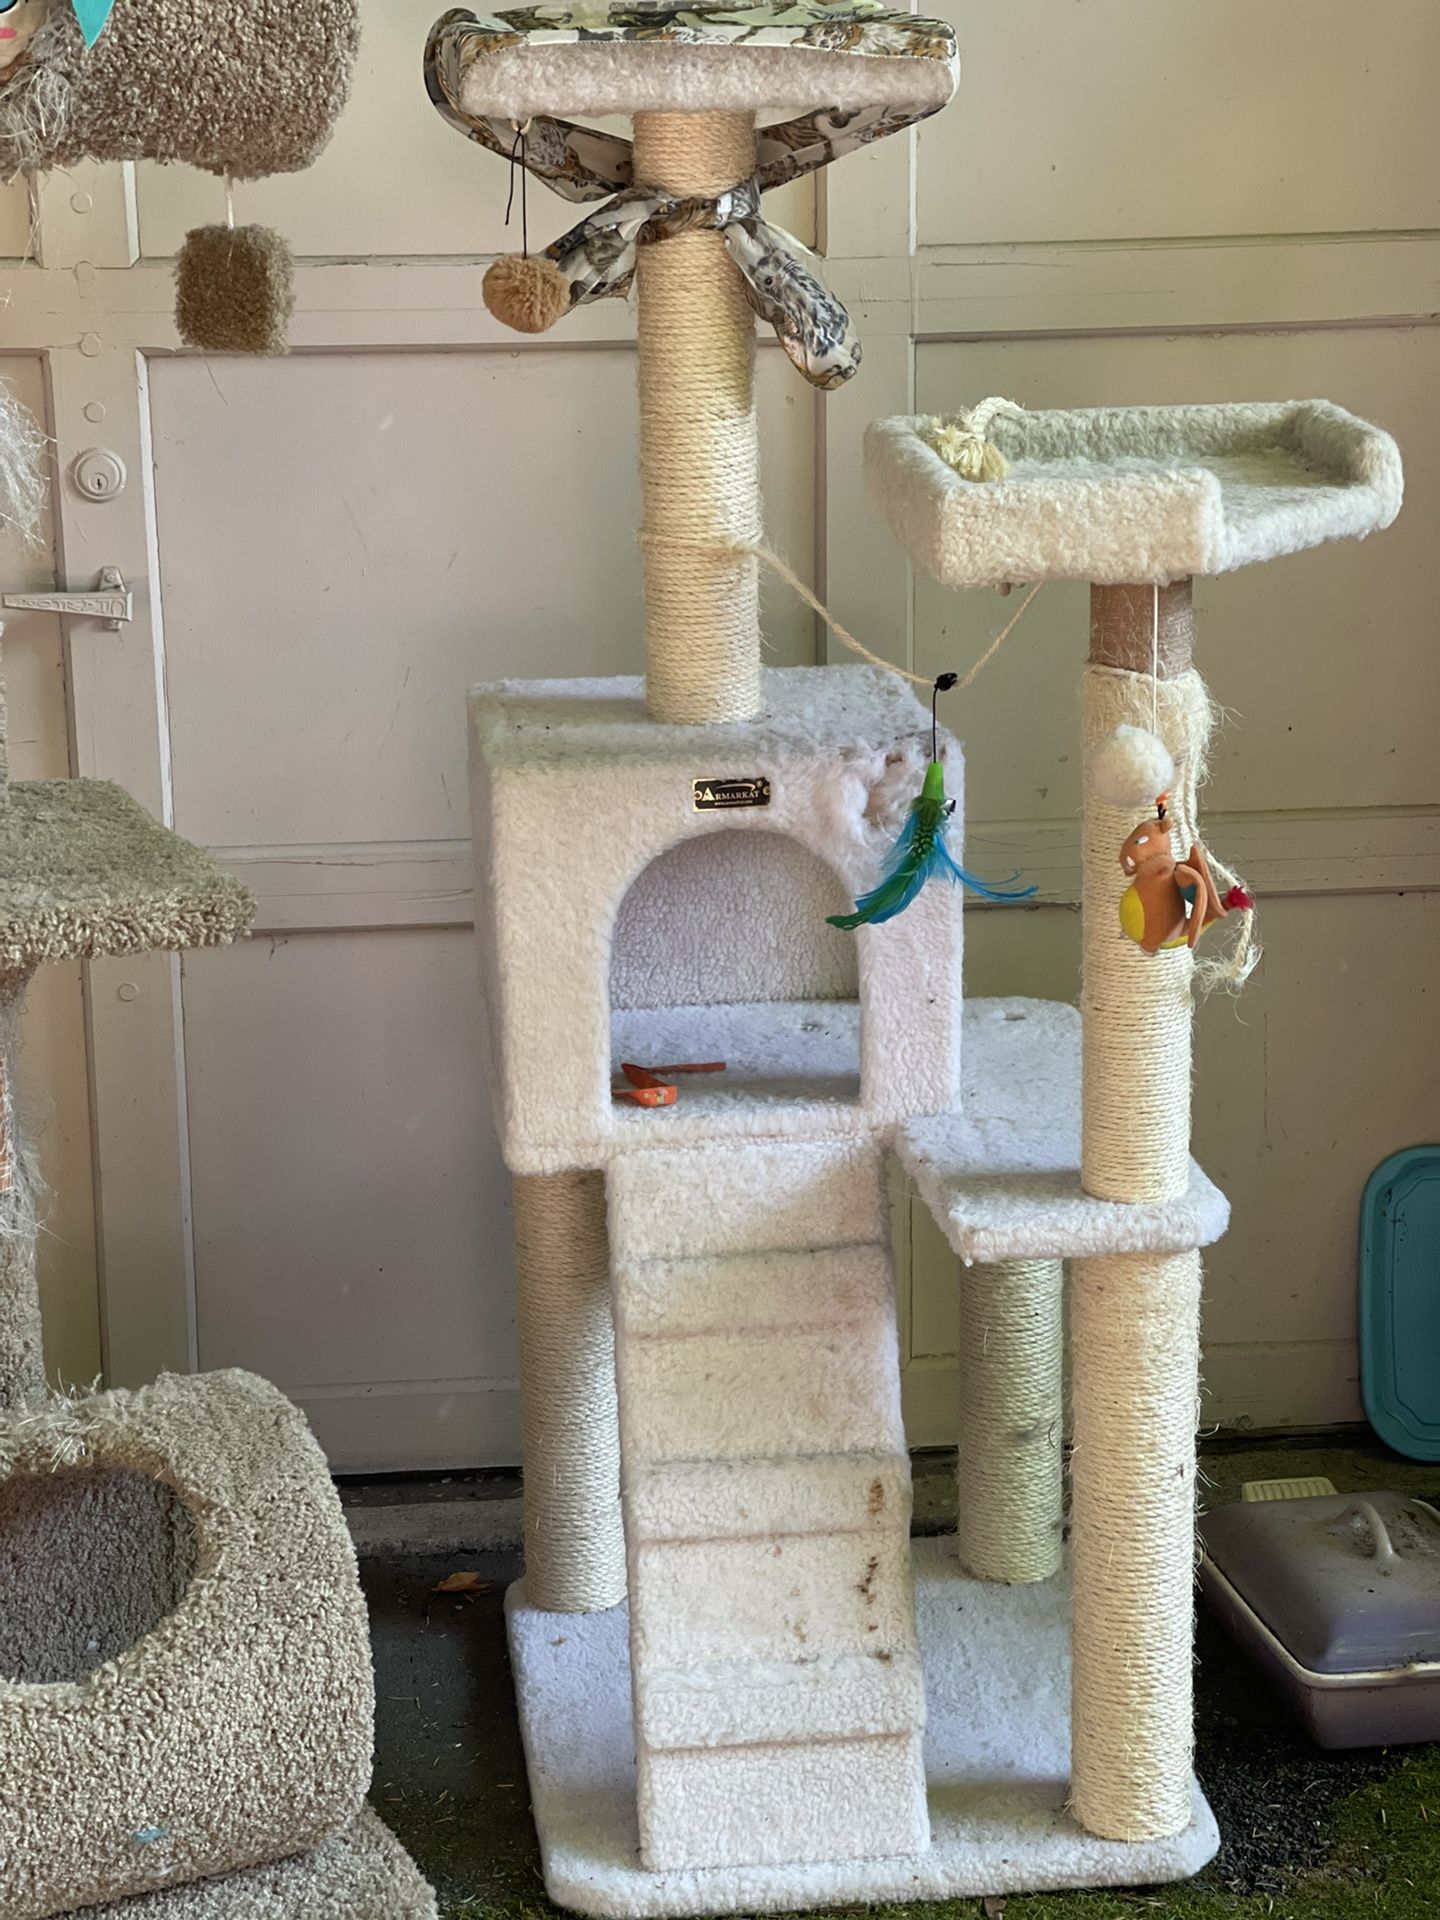 Cat Tree Jungle Gym Kitty Castle Cat Pickup Today!! Deals Offers Discount Climb Kitten Playground (2)   Need gone today!! Accepting offers!!   Near th